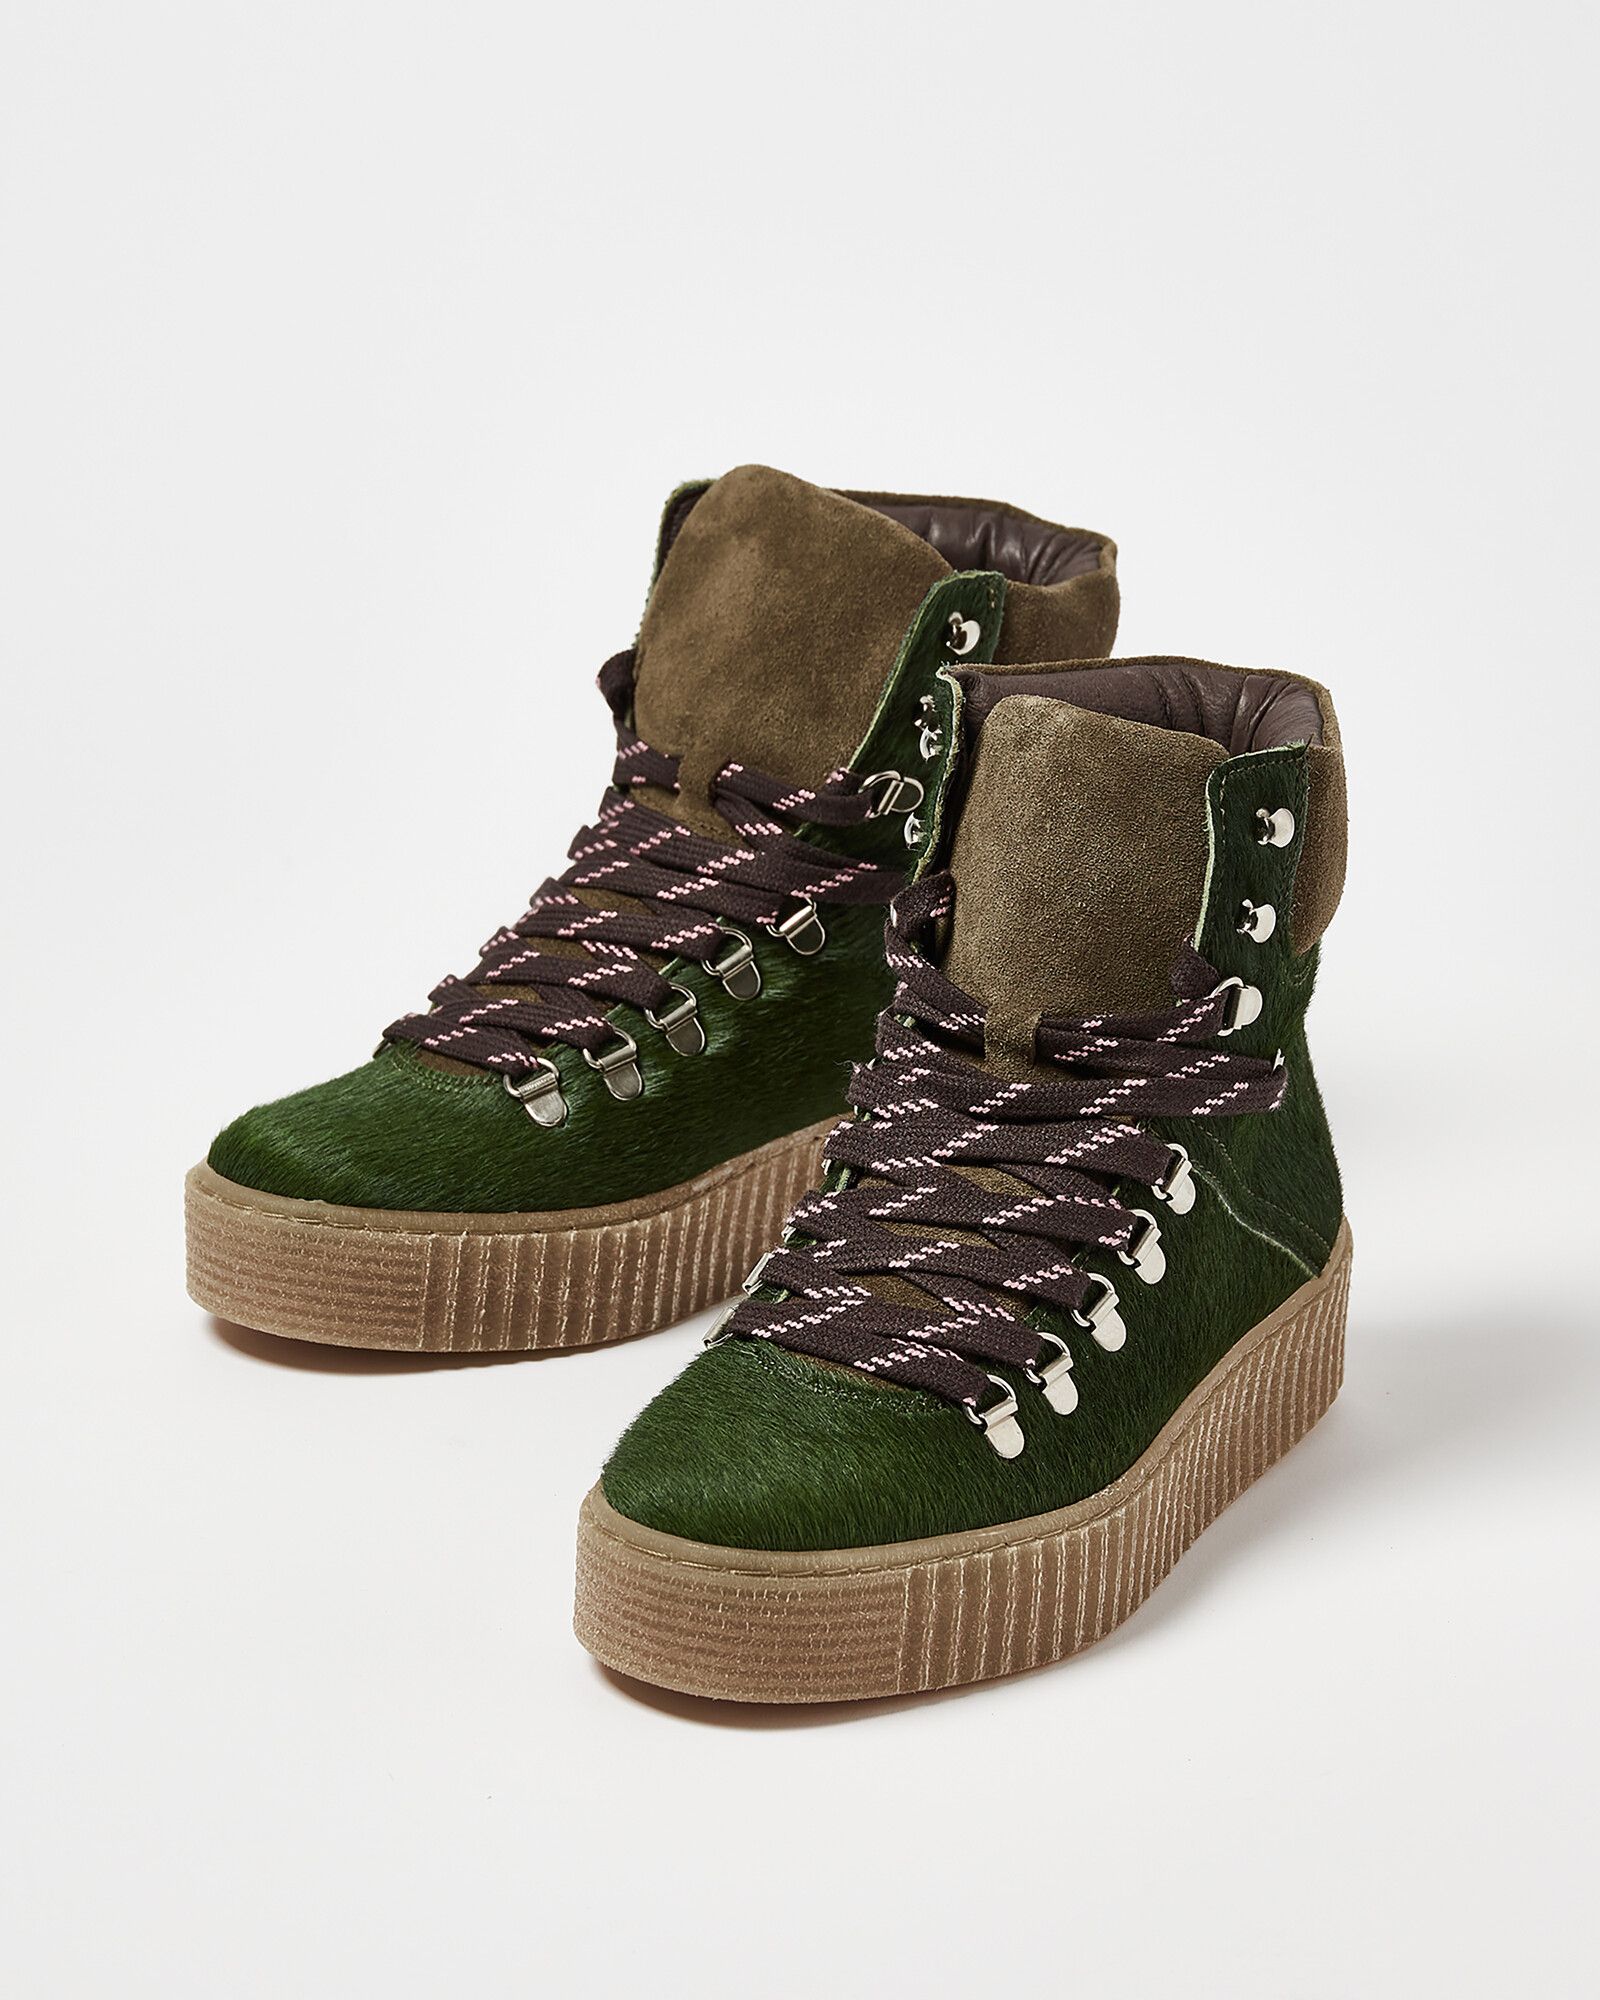 The Green Leather Hiking Boots | Oliver Bonas